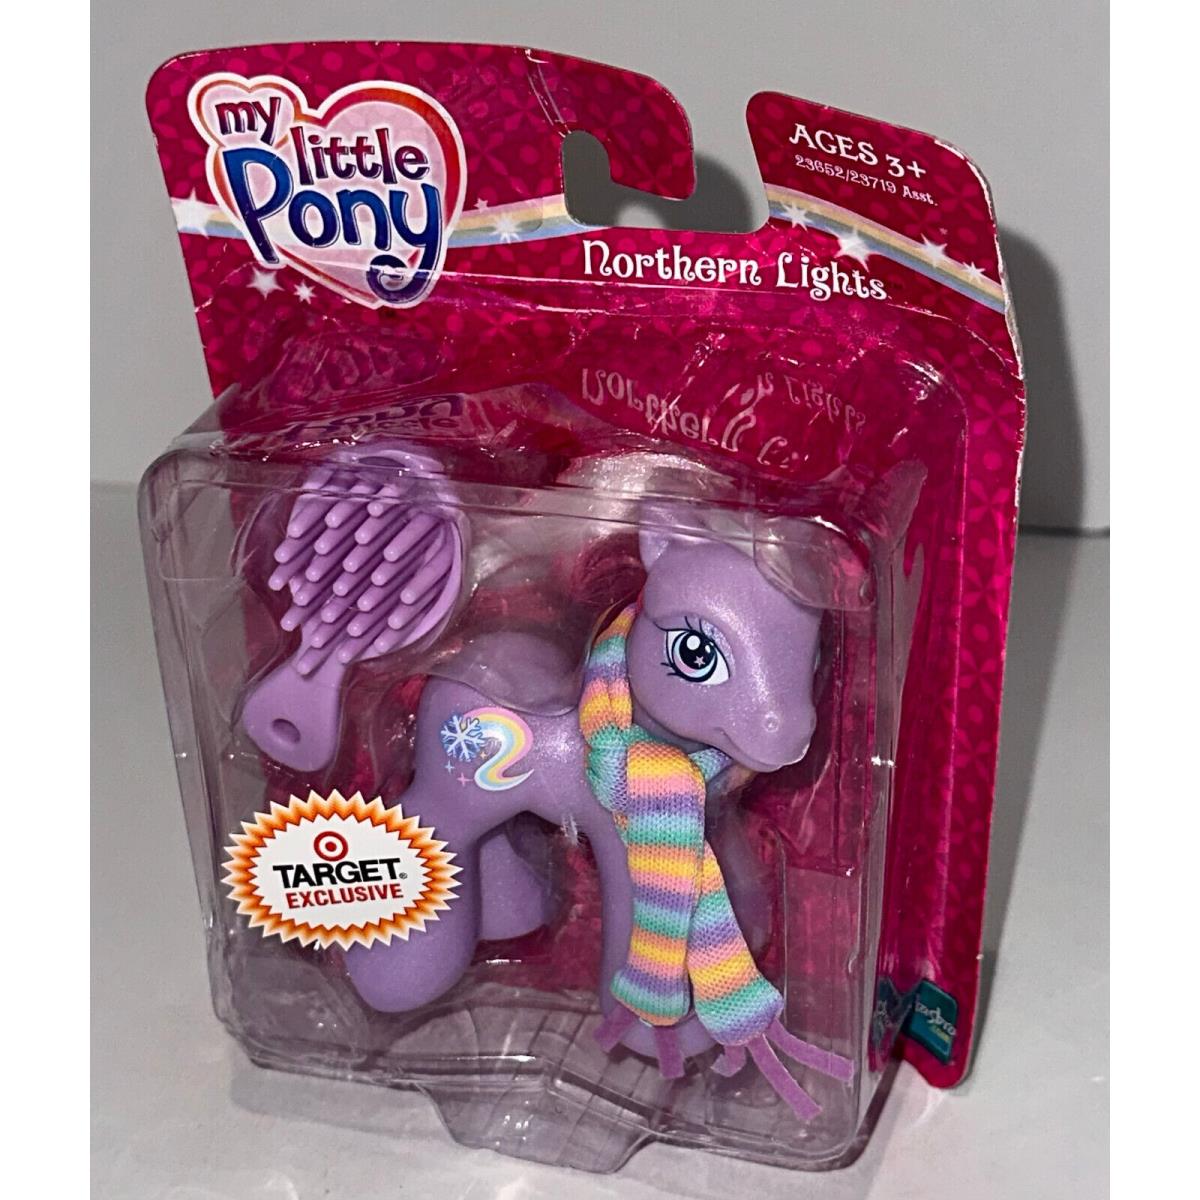 2006 Hasbro My Little Pony G3 Baby Northern Lights Target Exclusive